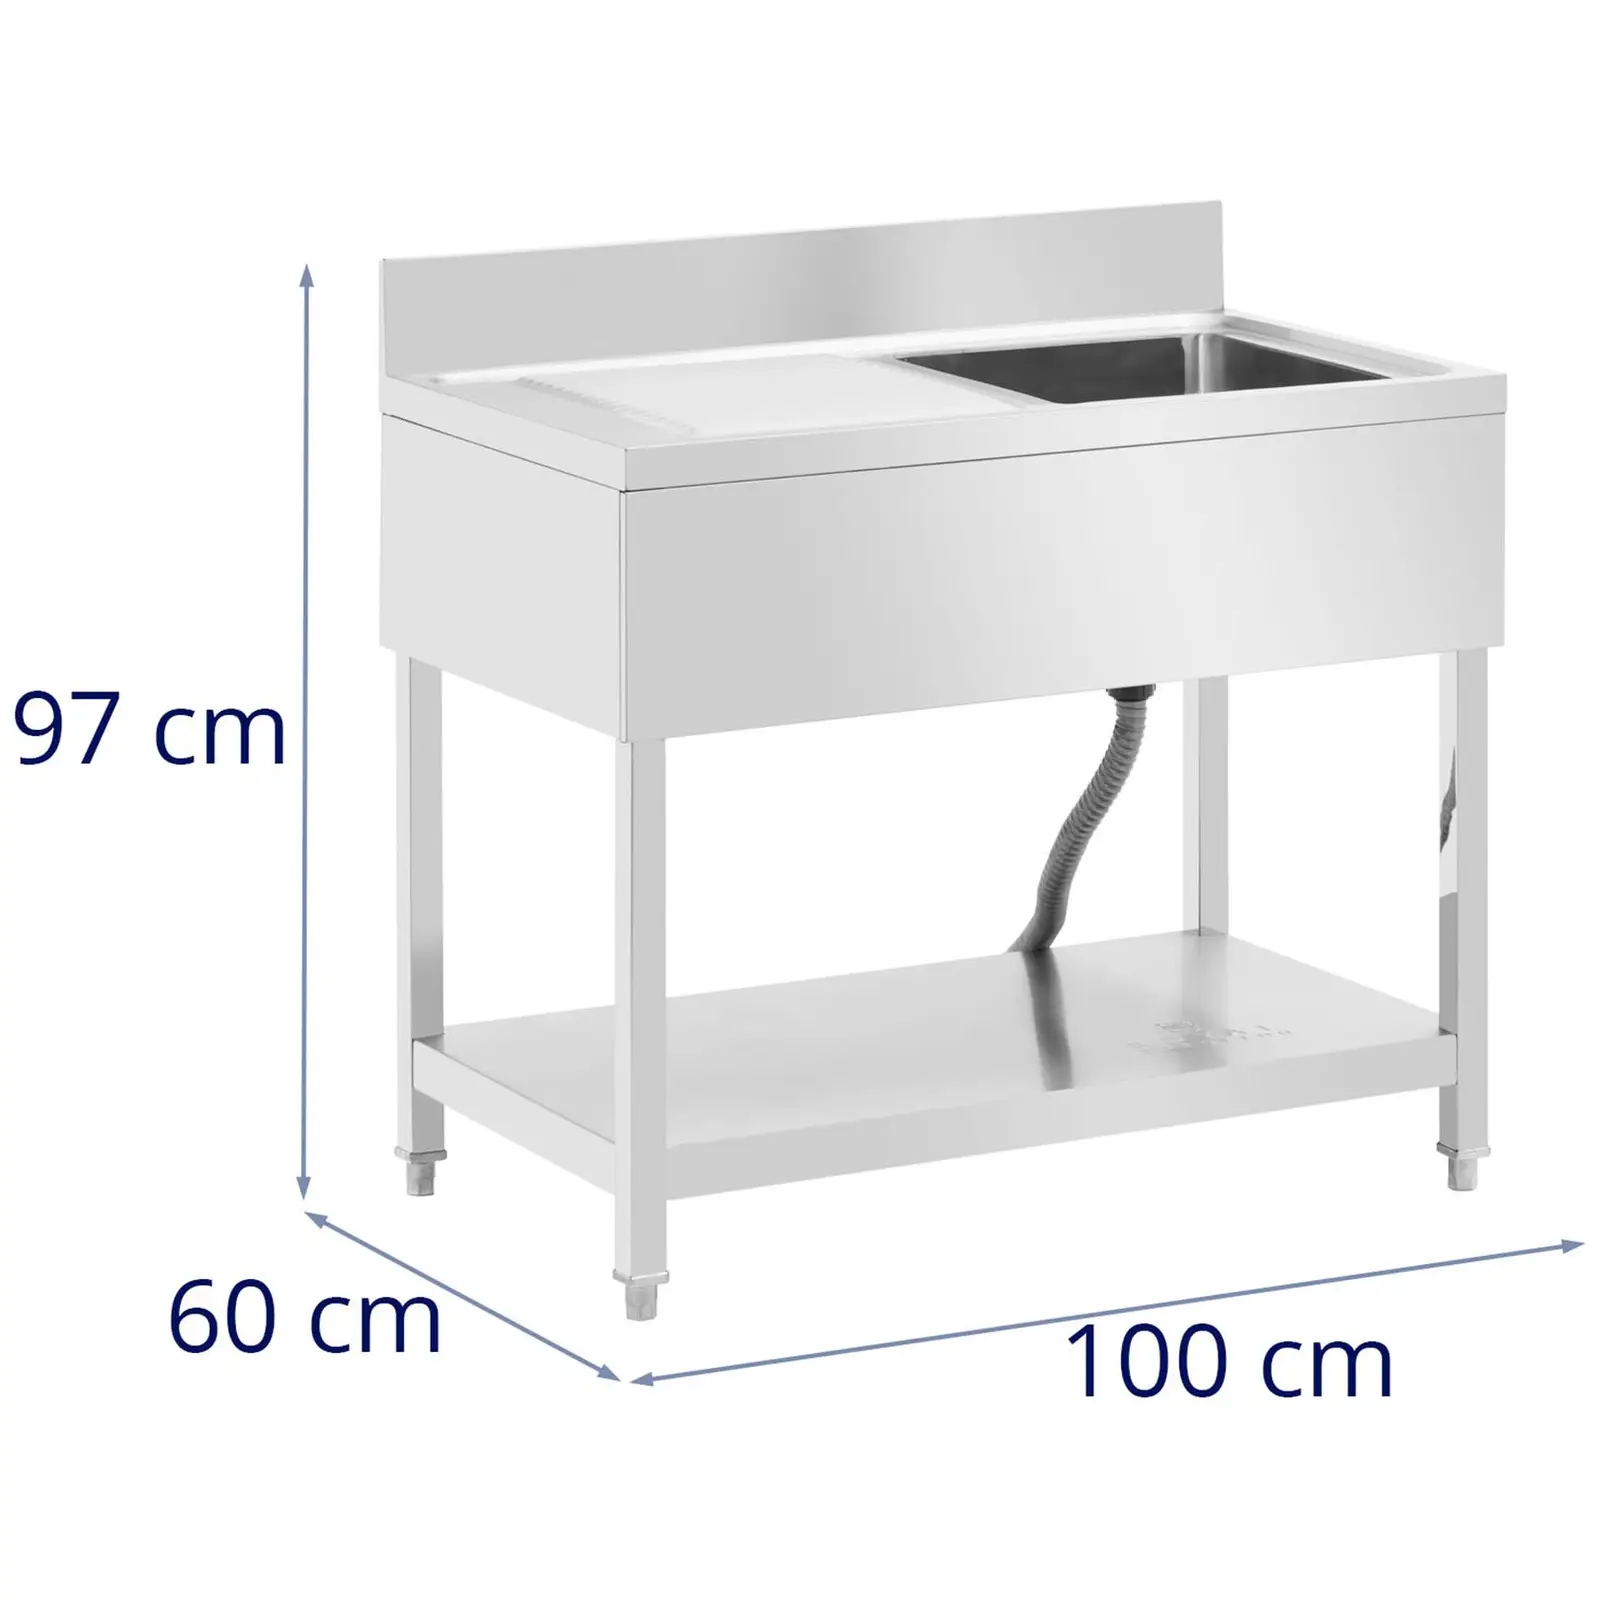 Sink Unit - 1 basin - stainless steel - 180 x 60 x 97 cm - Royal Catering